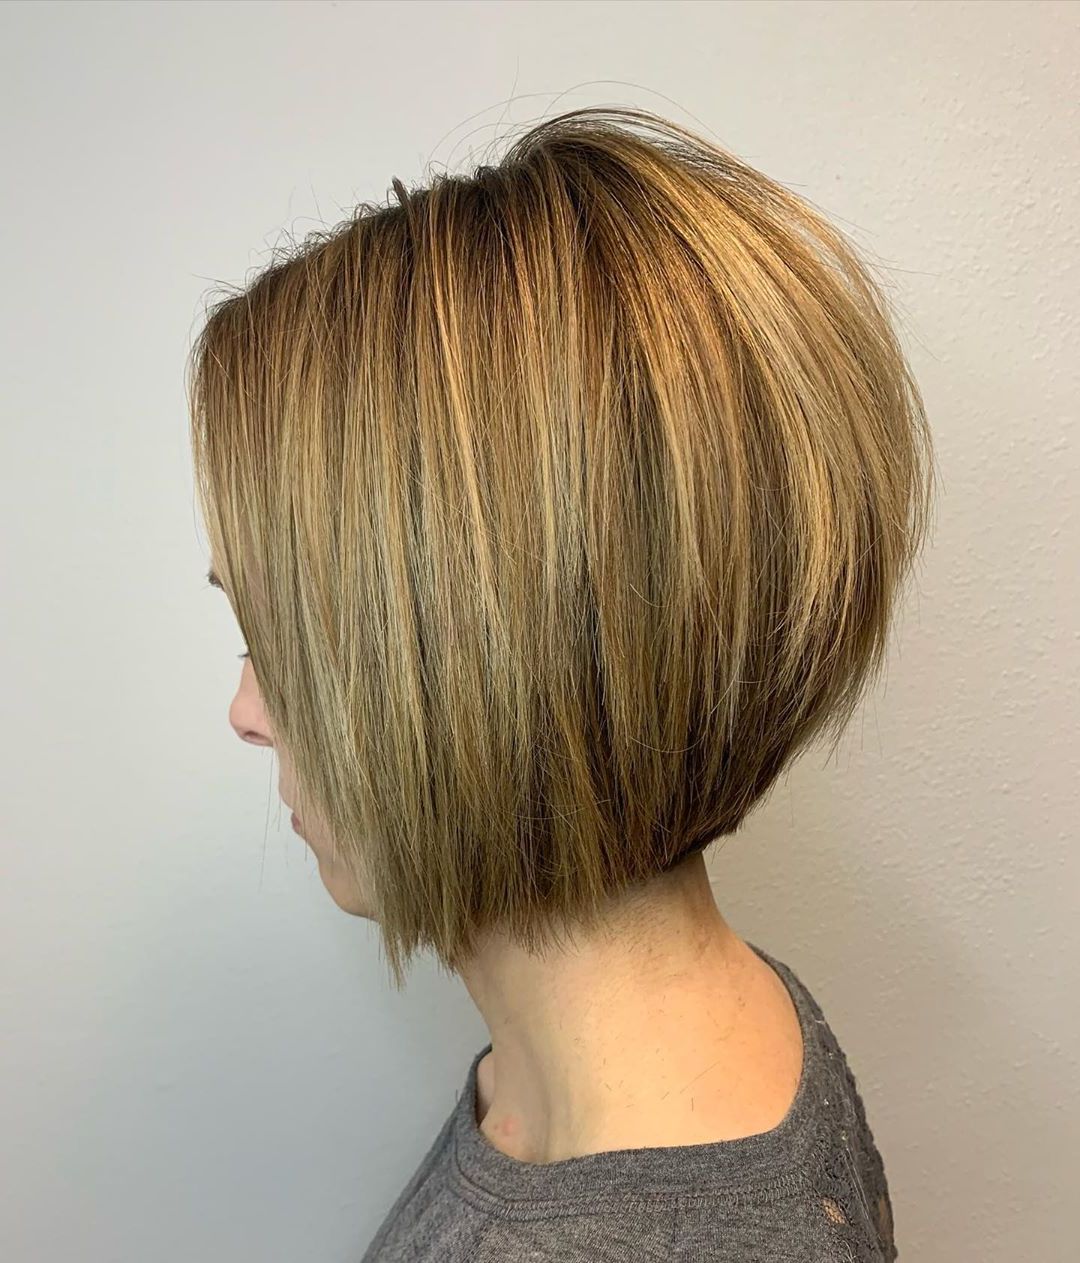 Most Recent Razored Brunette Comb Over Bob For Razor Cut Bob Haircuts Are Still Trending And Here Are 18 Ideas To Consider (View 13 of 20)